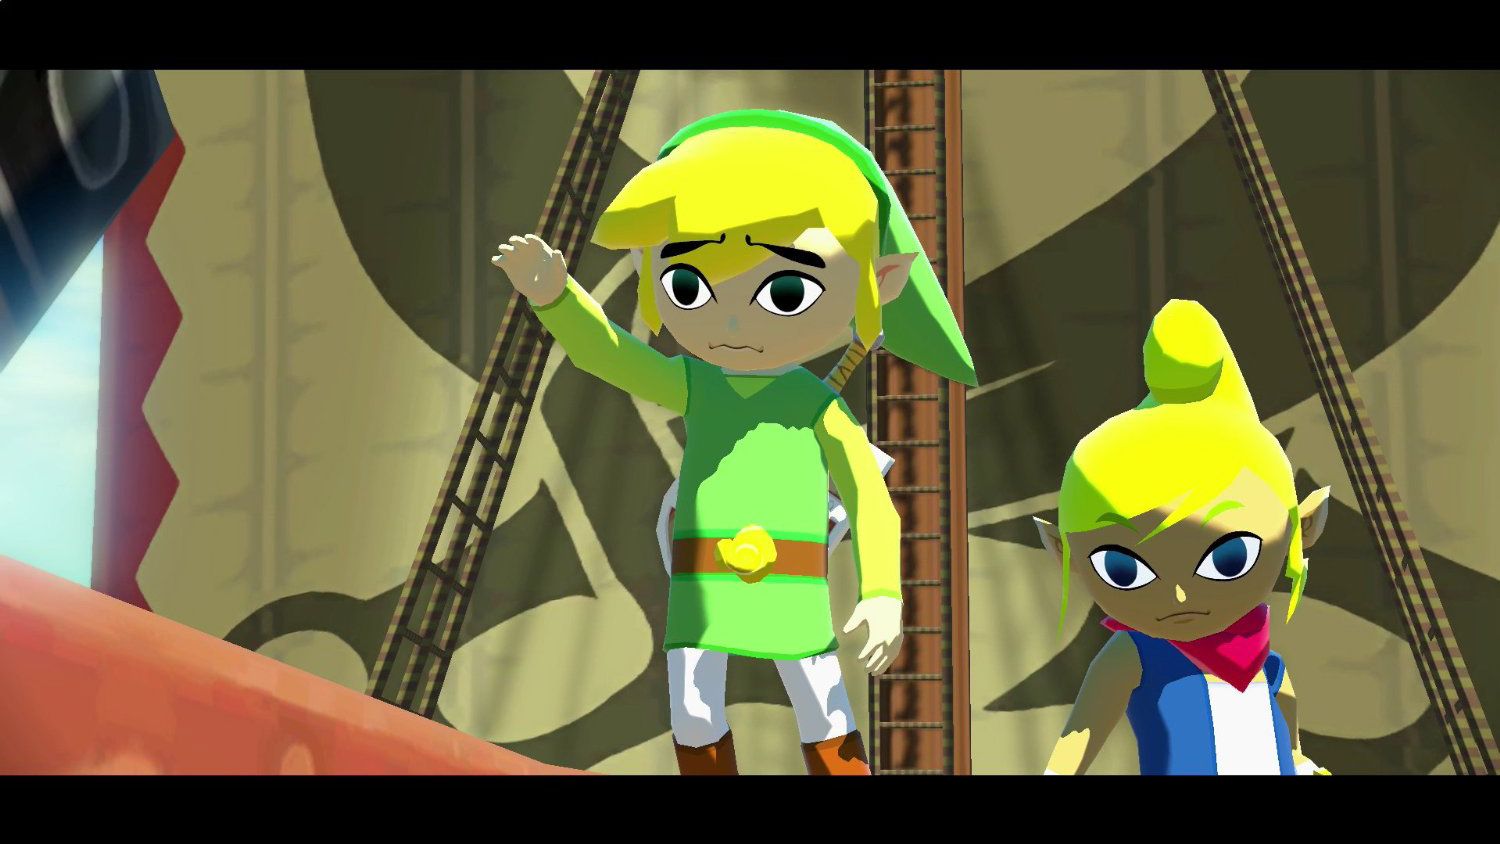 Wind Waker HD' made in six months